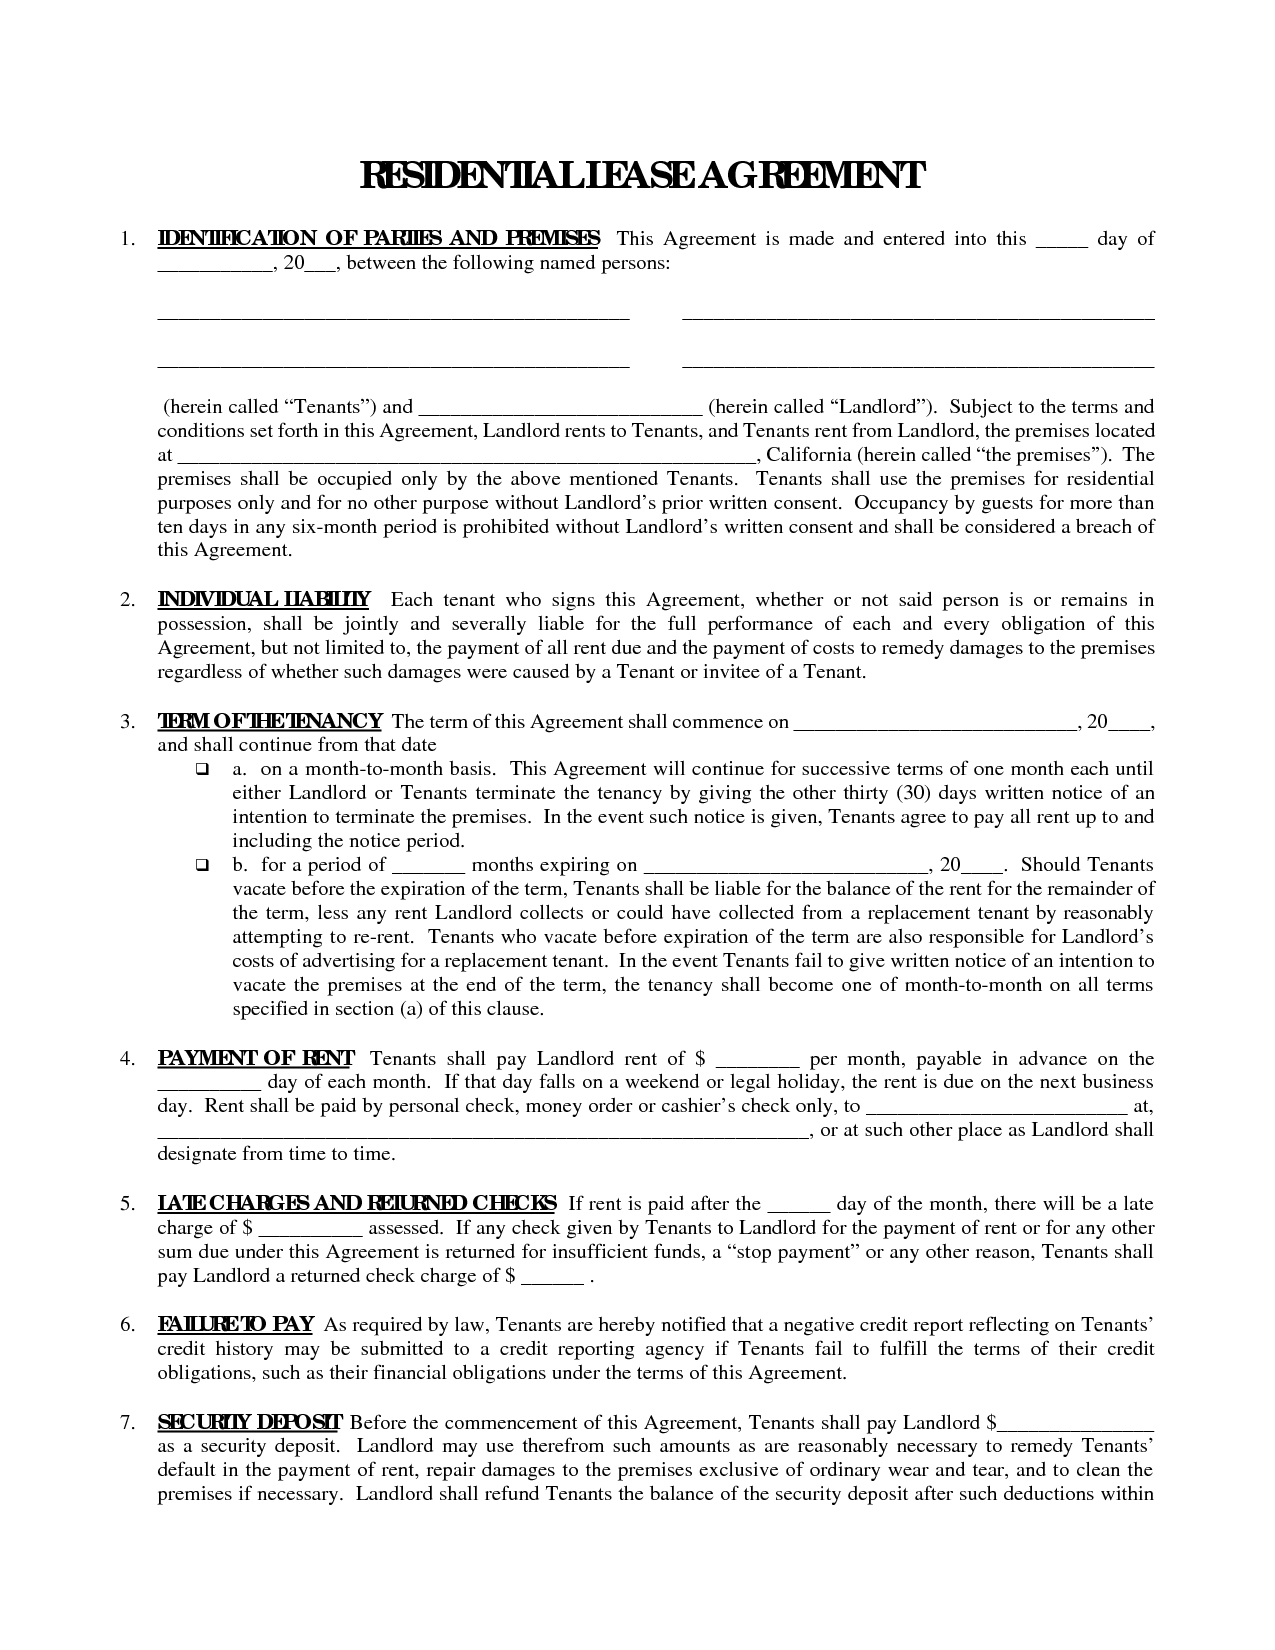 Printable Residential Free House Lease Agreement | Residential Lease - Free Printable Lease Agreement